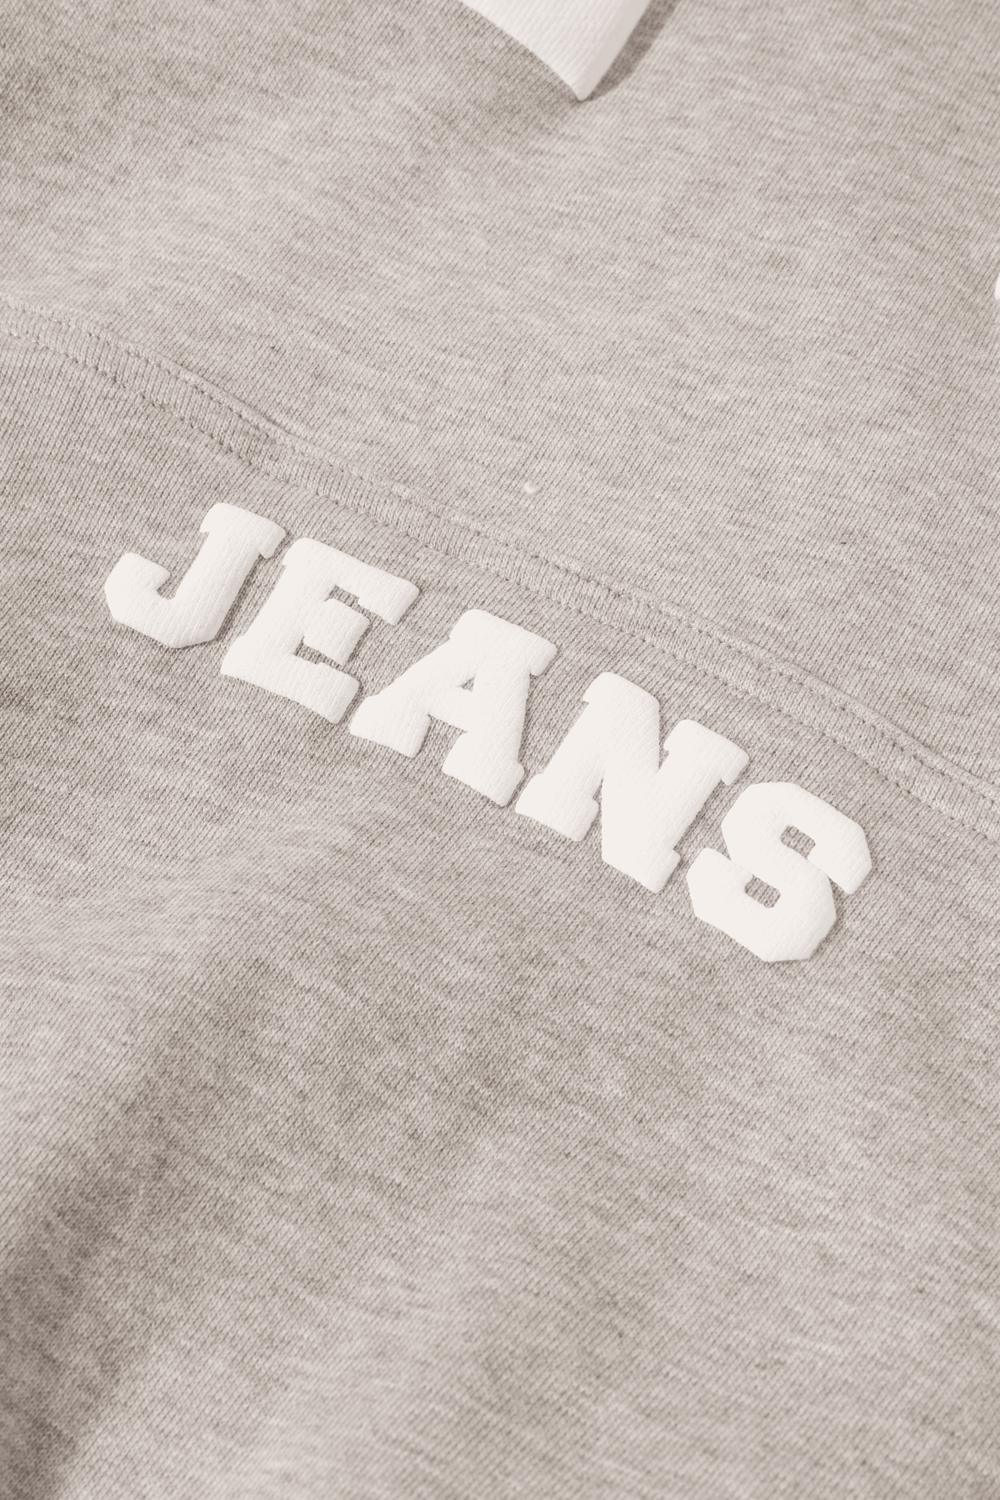 TRILLION JEANS GREY PULL OVER HOODIE 